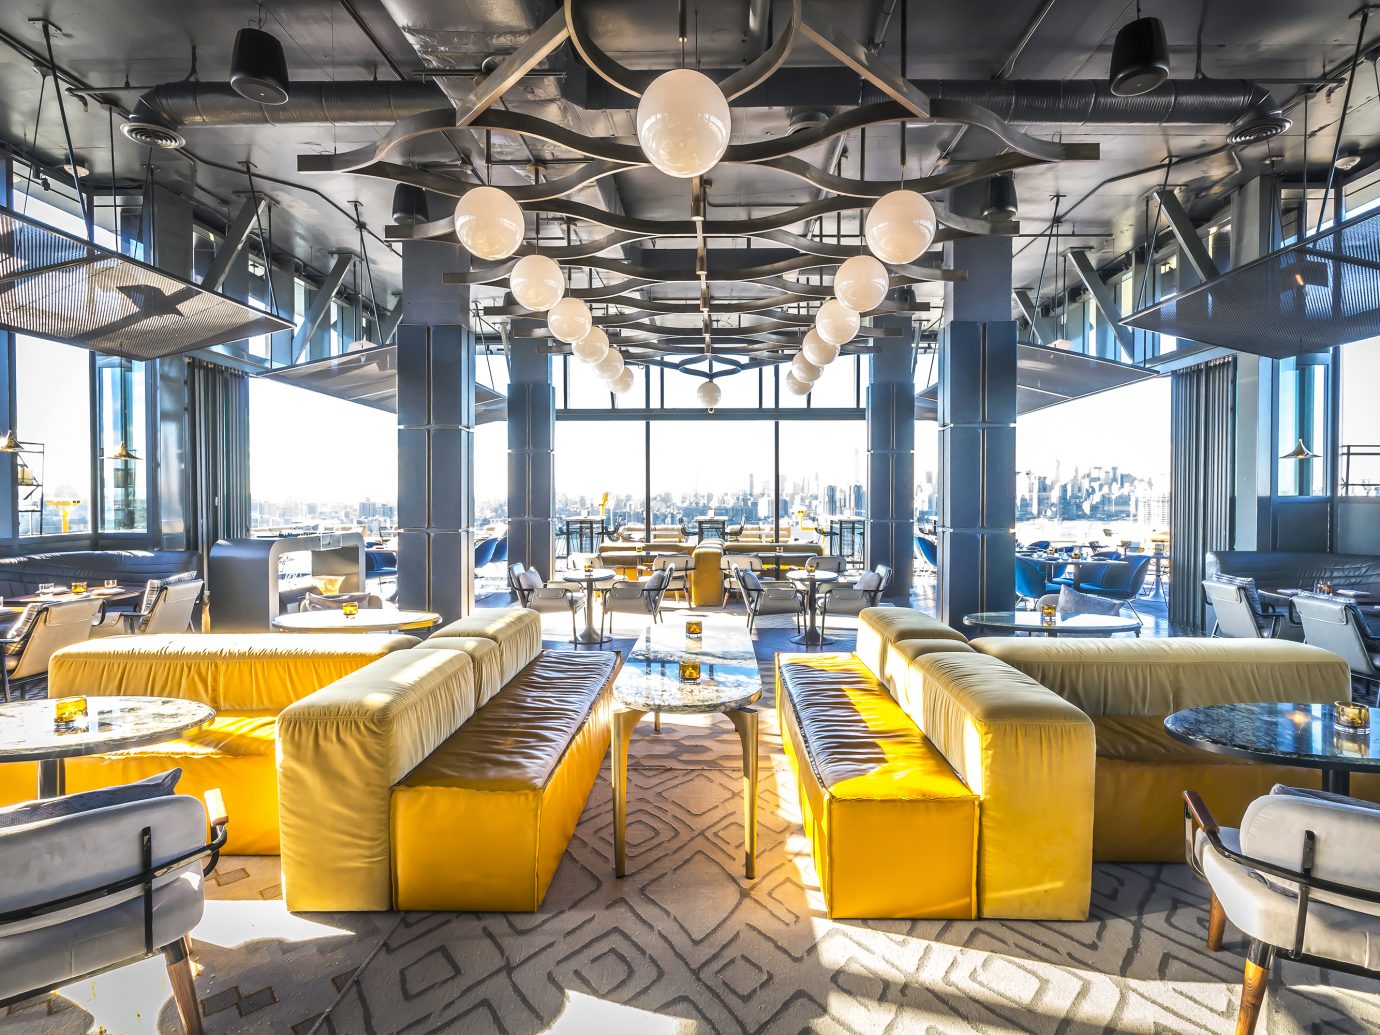 sunny day showing off interior of a bar with bright yellow couches and a very airy space